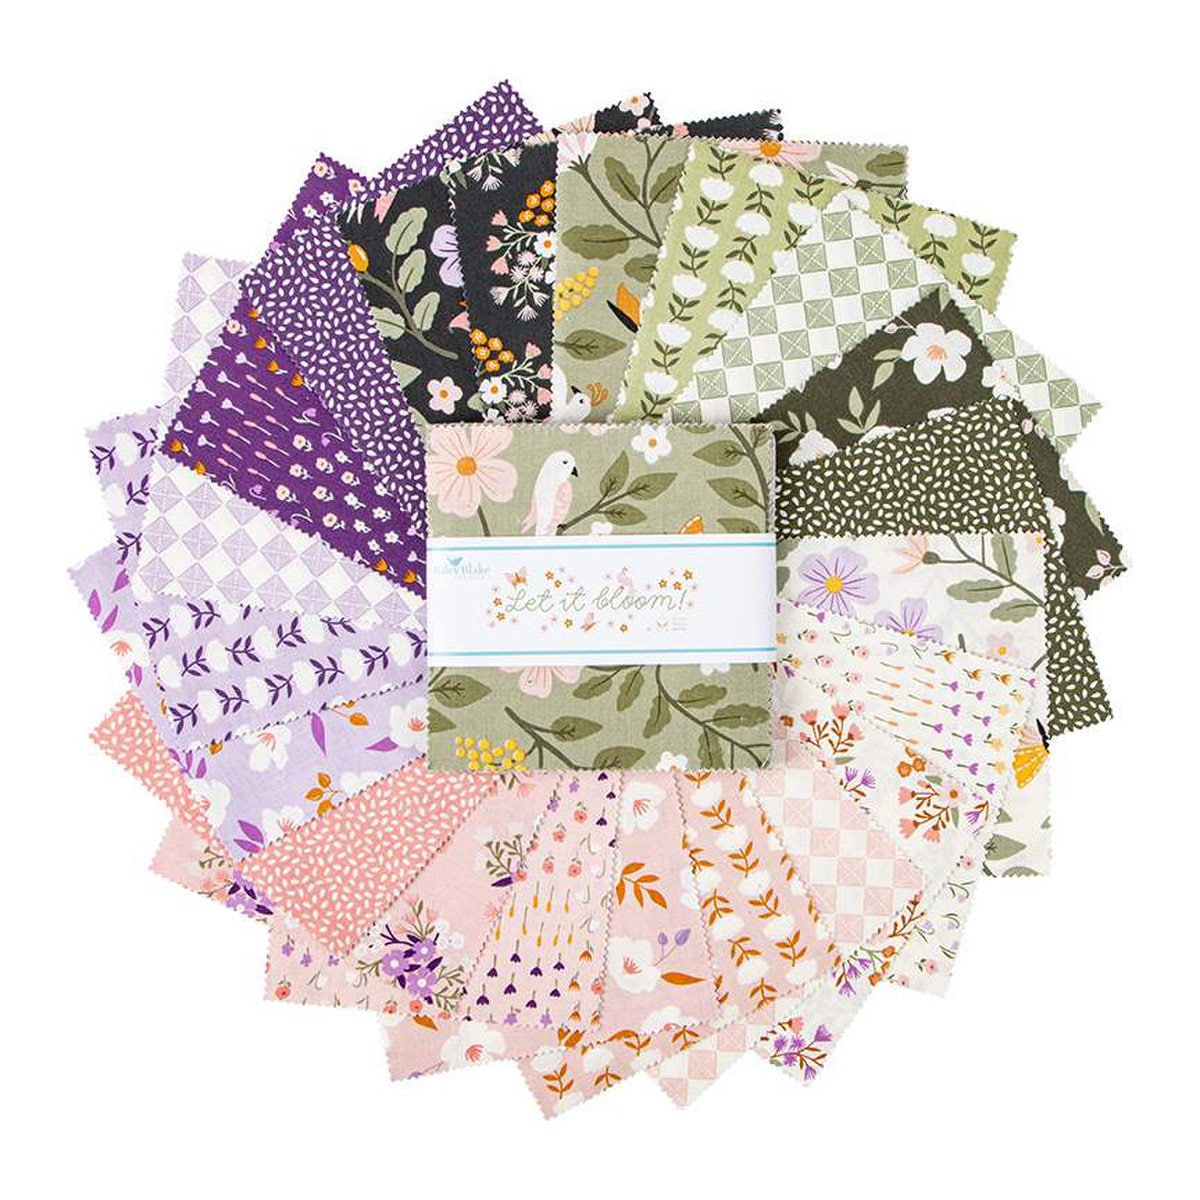 Let it Bloom 5" Stacker Charm Pack - Riley Blake Designs 5-14280-42, 42 - 5 X 5 Fabric Squares, Green Purple Pink Floral Themed Charm Pack